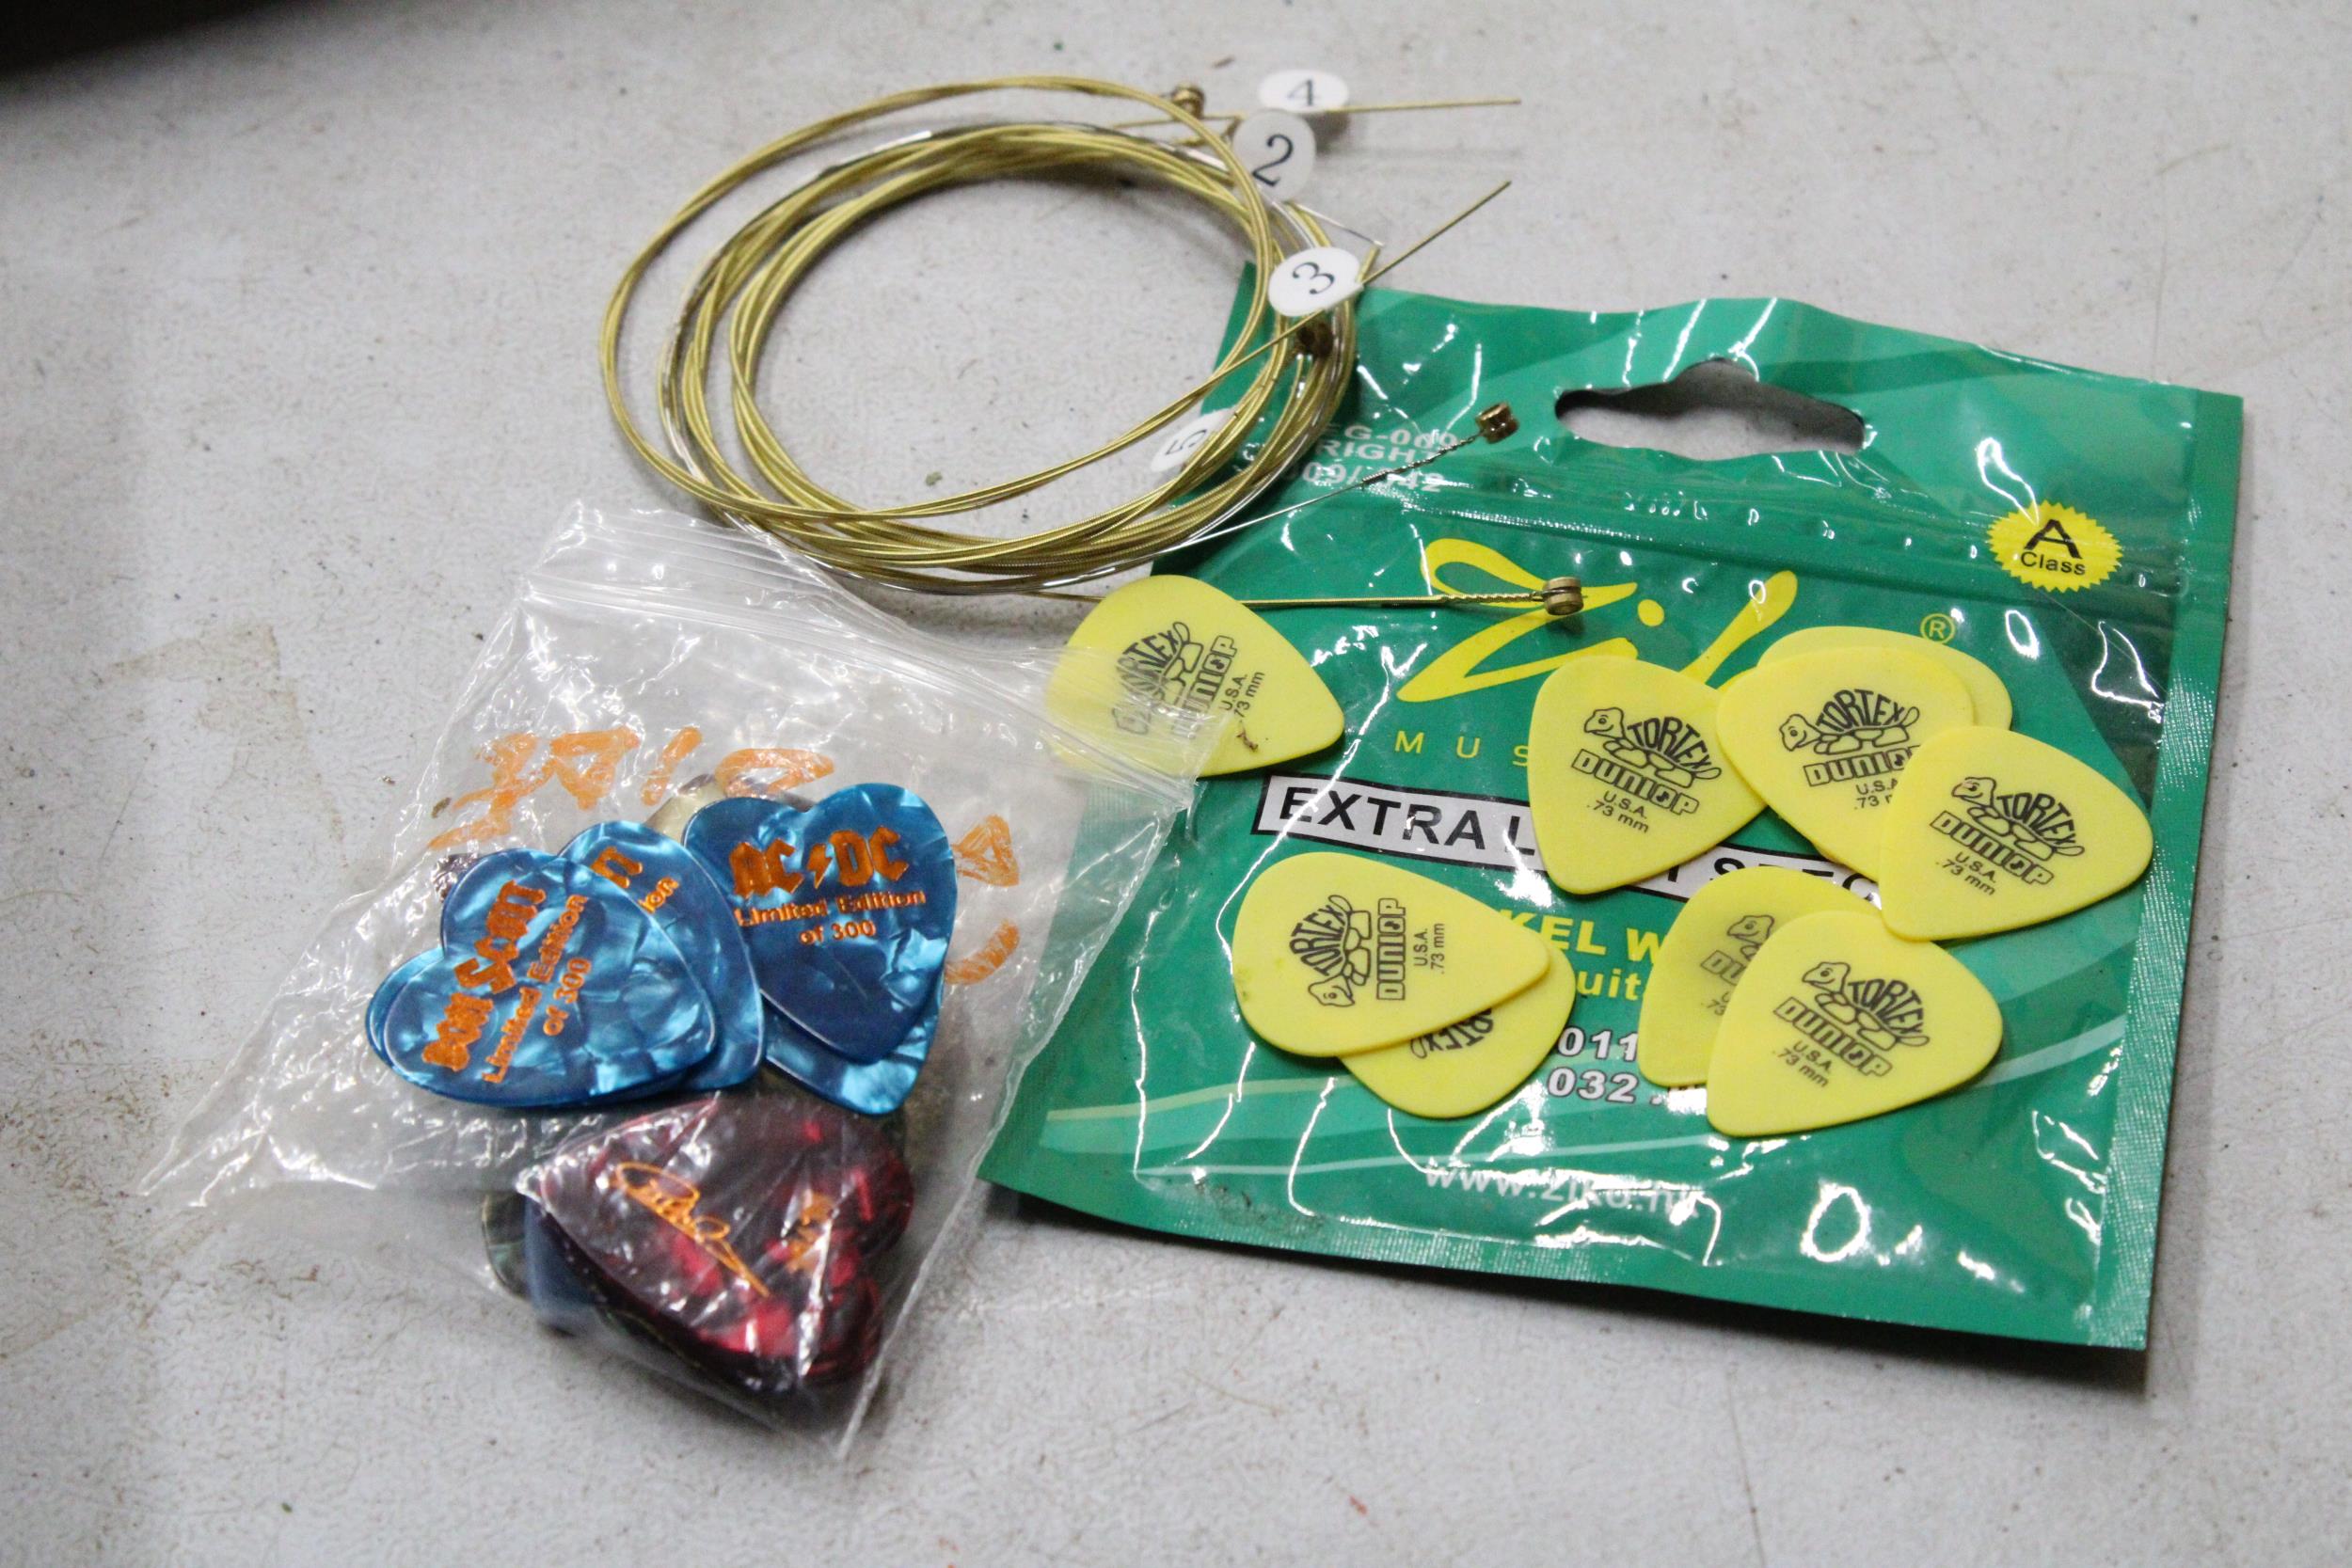 A QUANTITY OF ELECTRIC GUITAR STRINGS AND PLECTRUMS - Image 5 of 5